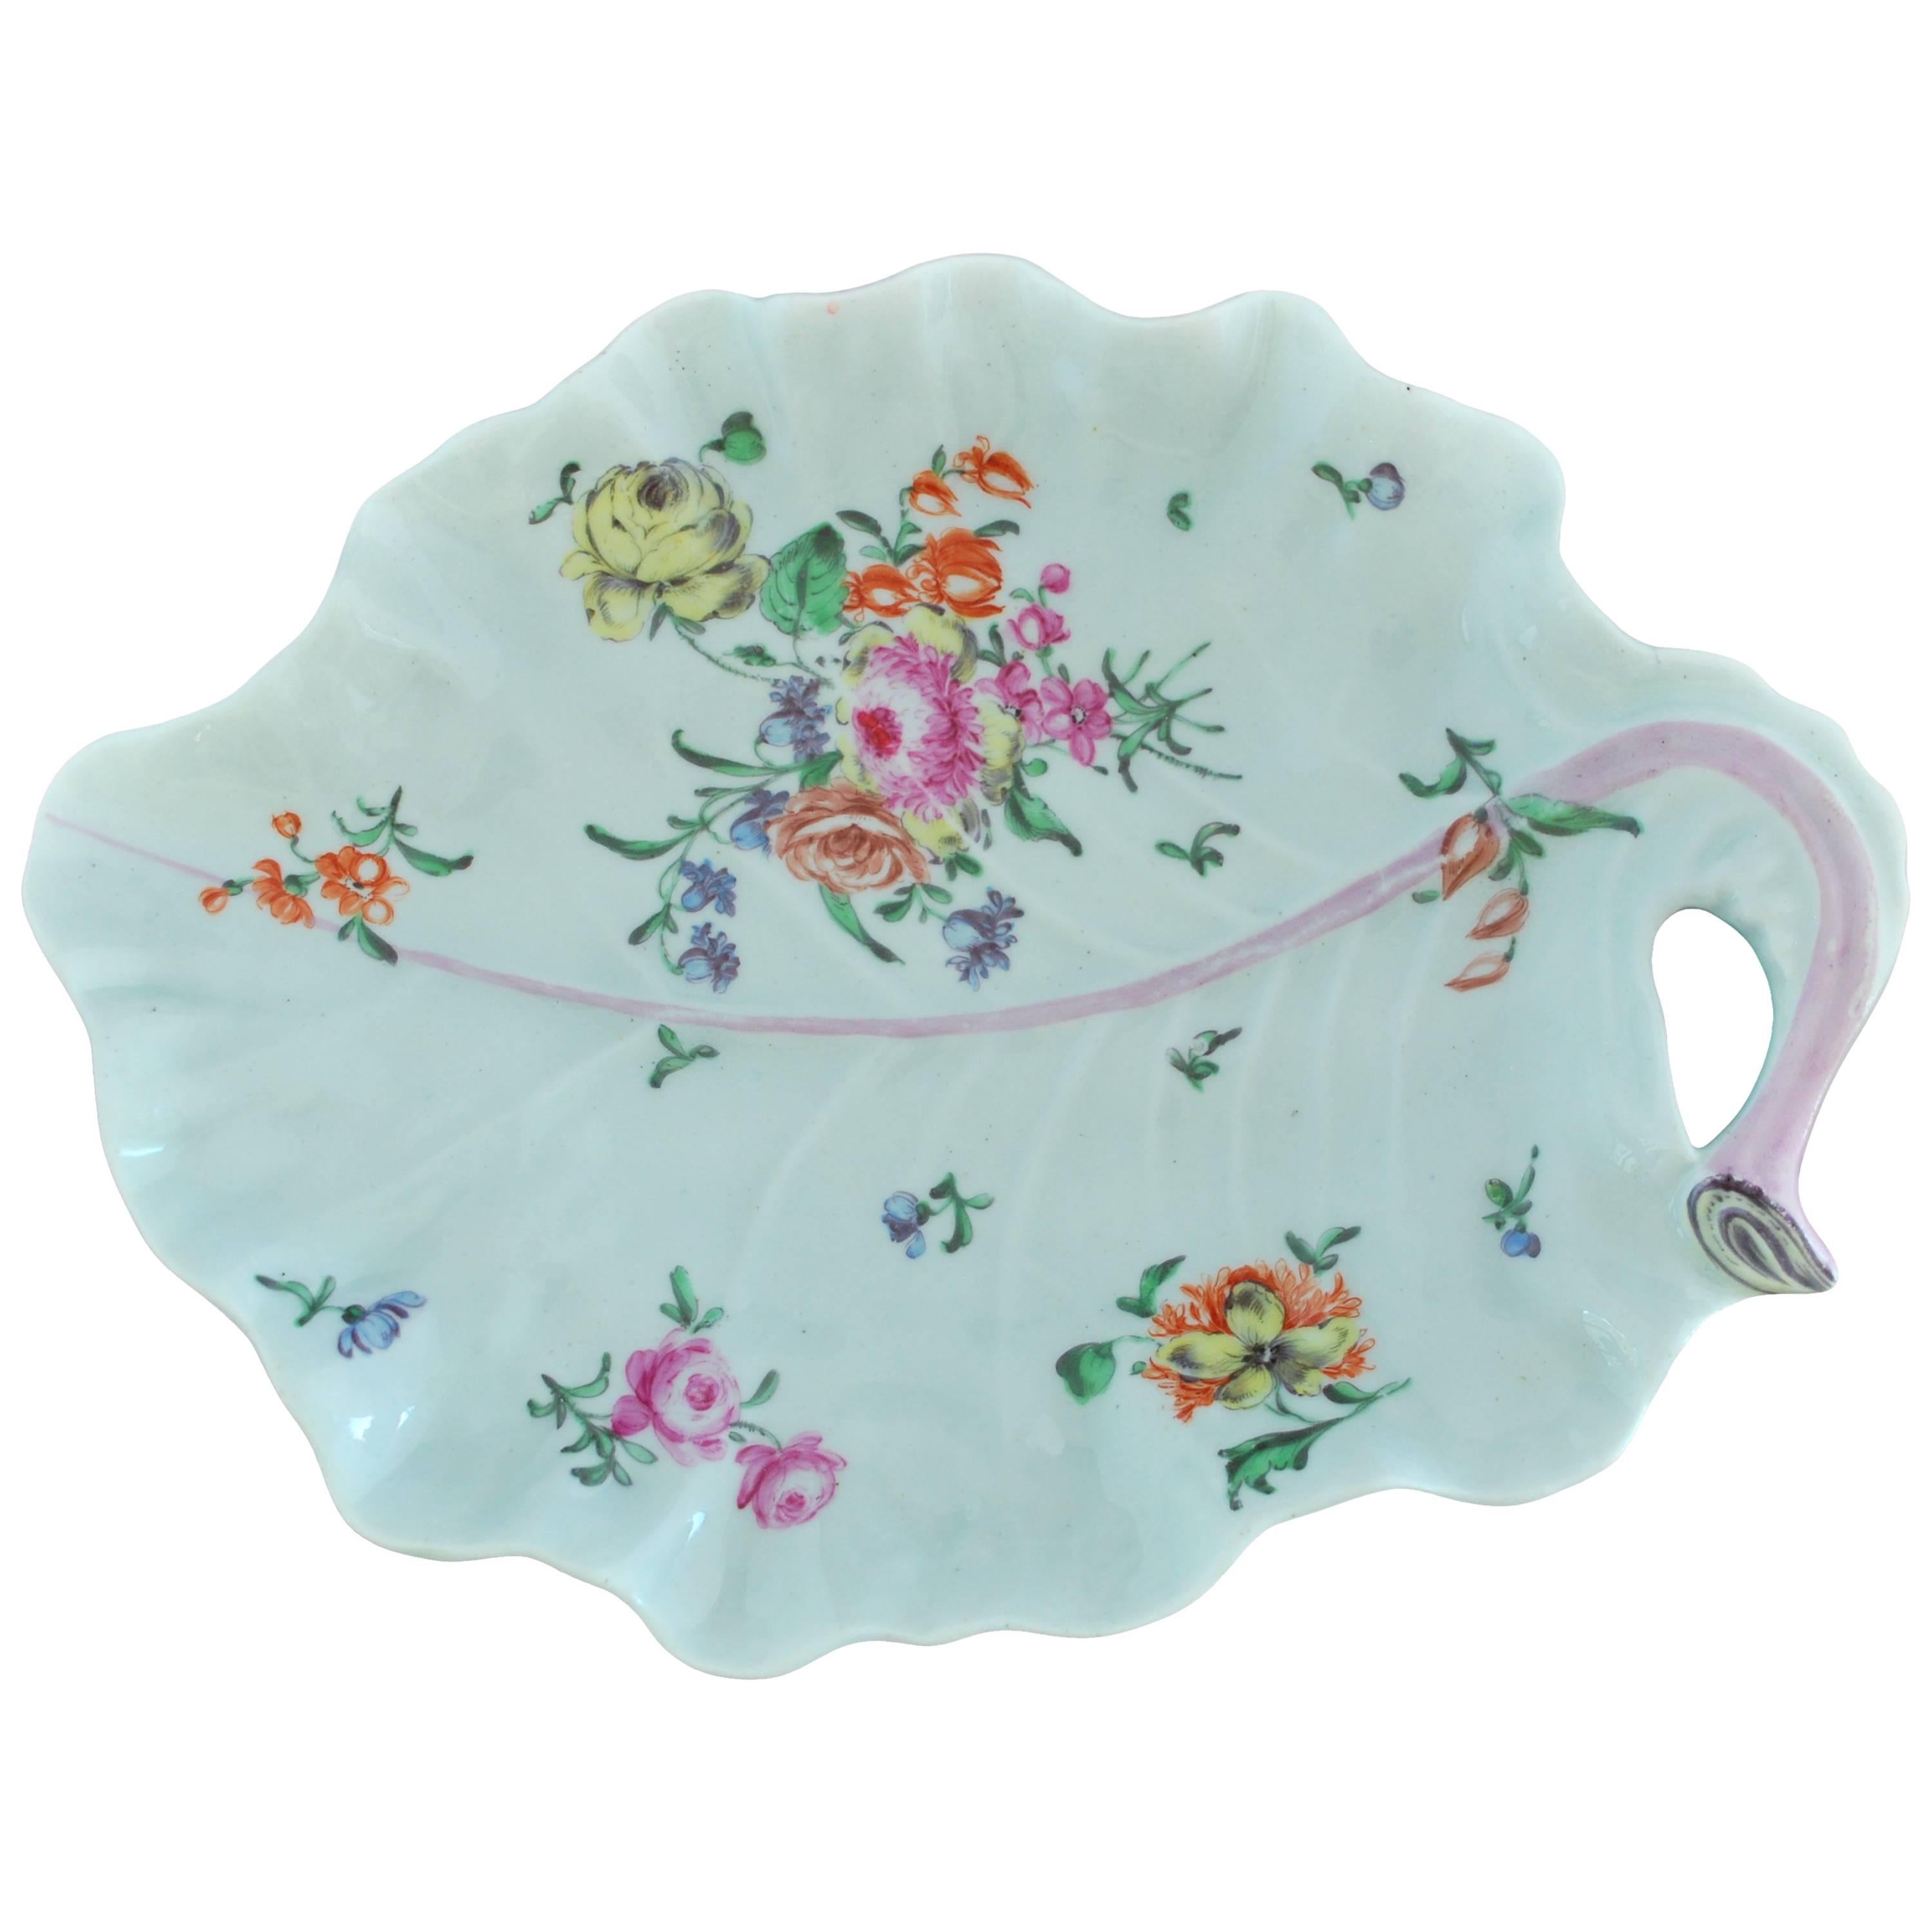 Leaf-Shaped Dish, London Decorated, Worcester, circa 1760